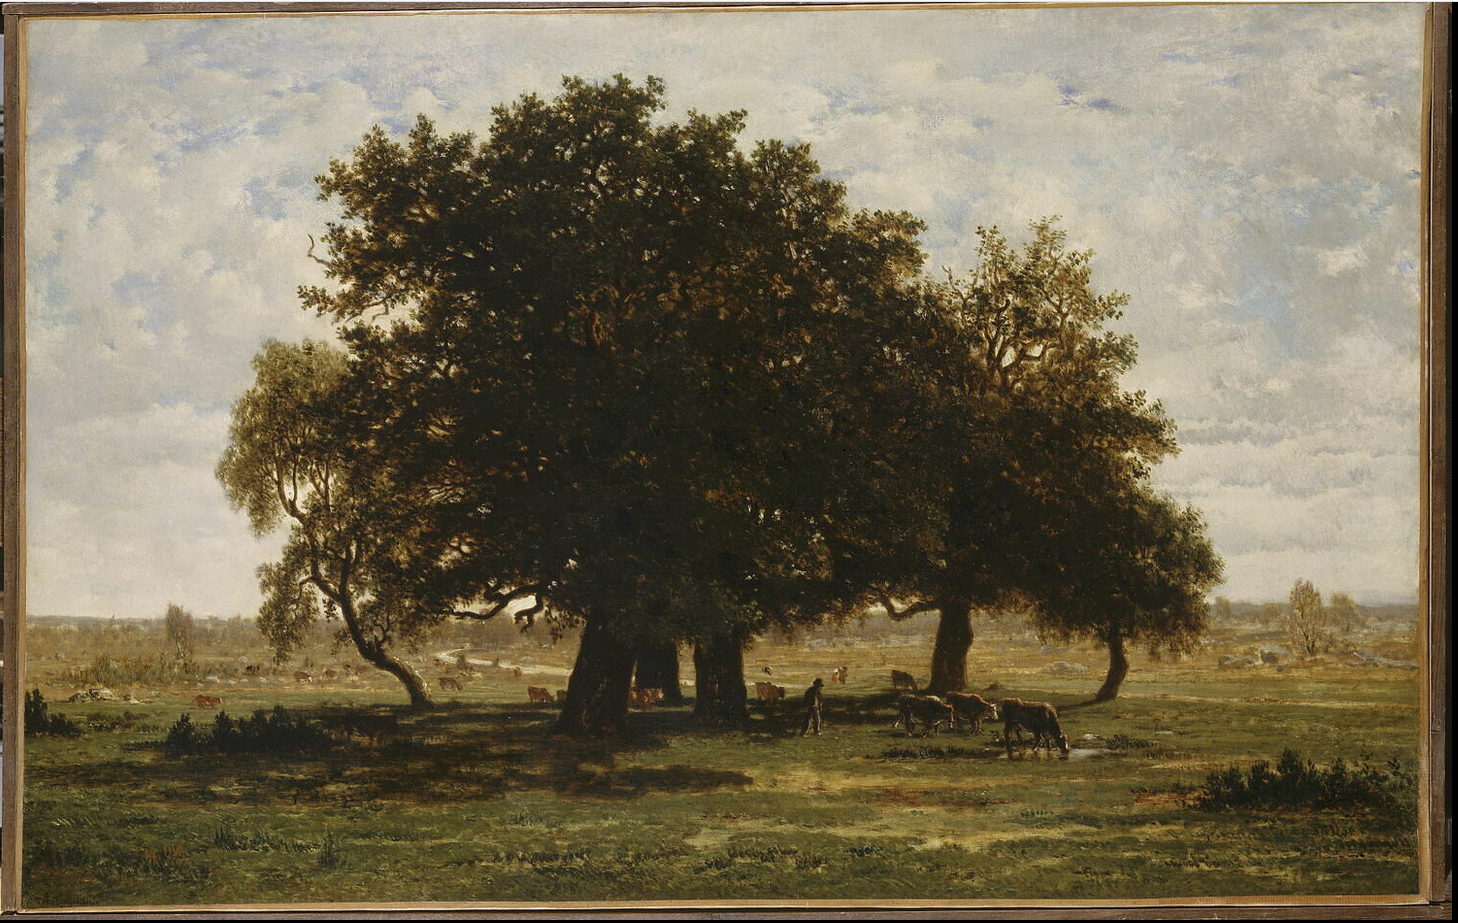 A painting of a series of oak trees in a large grass field. A herd of cattle and a figure sits under the shade. Behind the trees, there are more animals grazing the vast green land. The sky above them is blue but is covered by clouds.